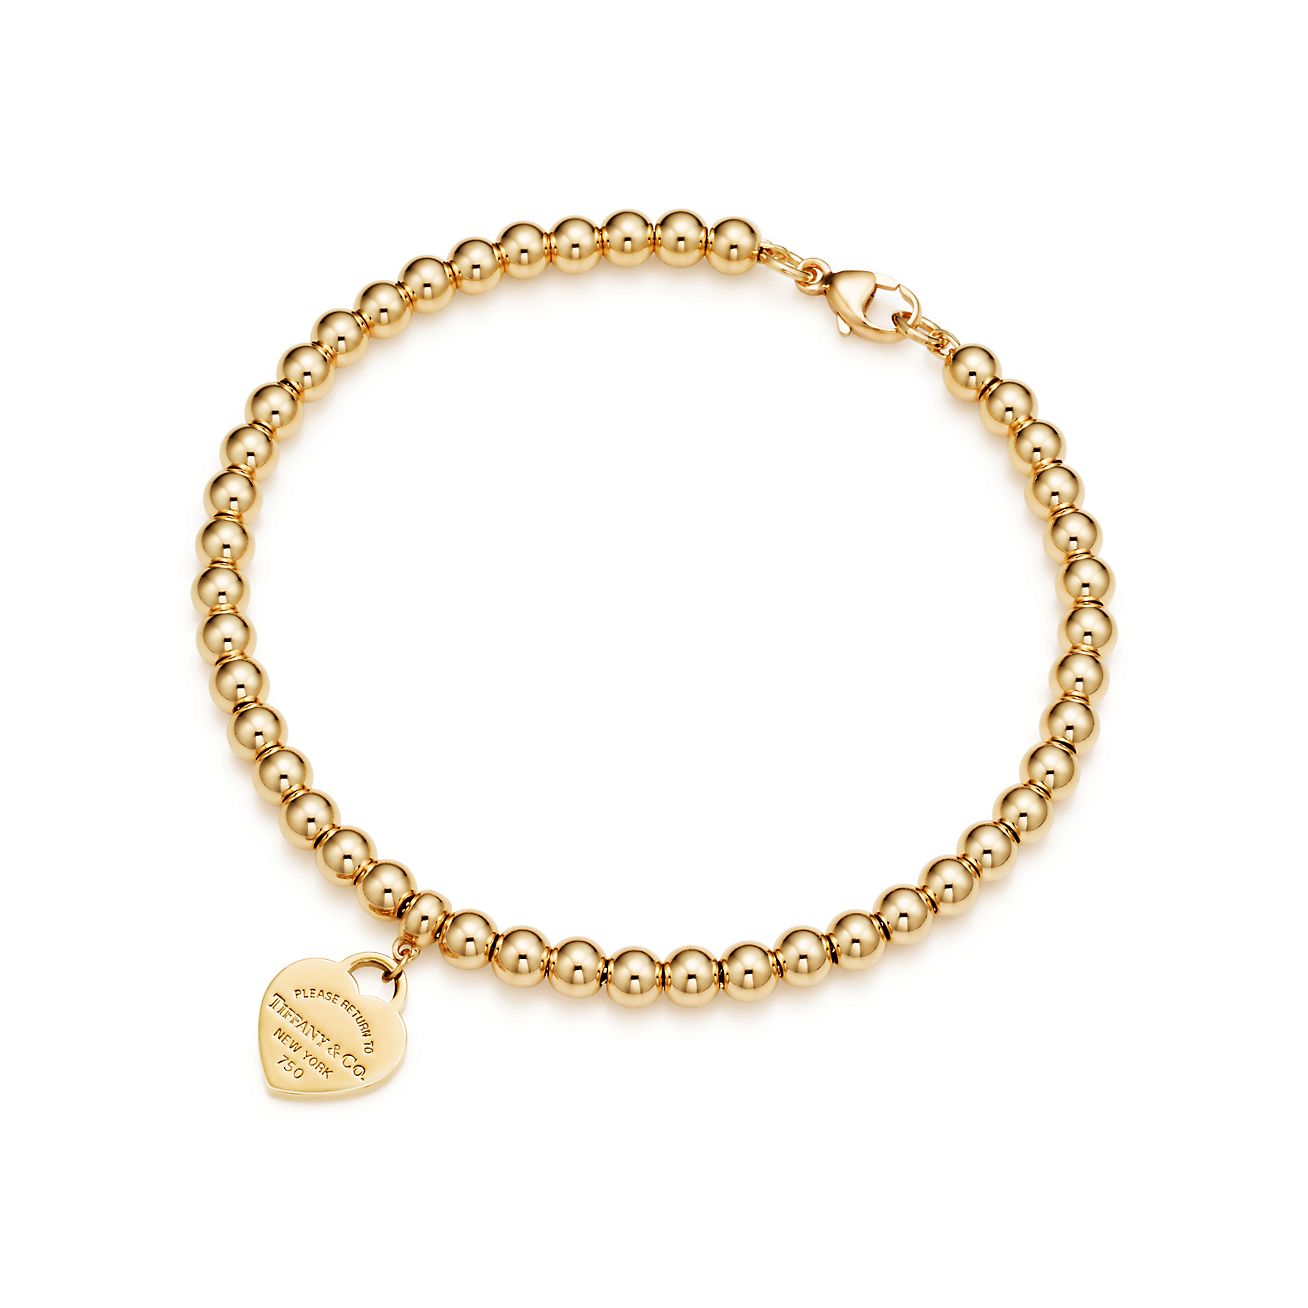 Gold Bead Bracelet with Charm